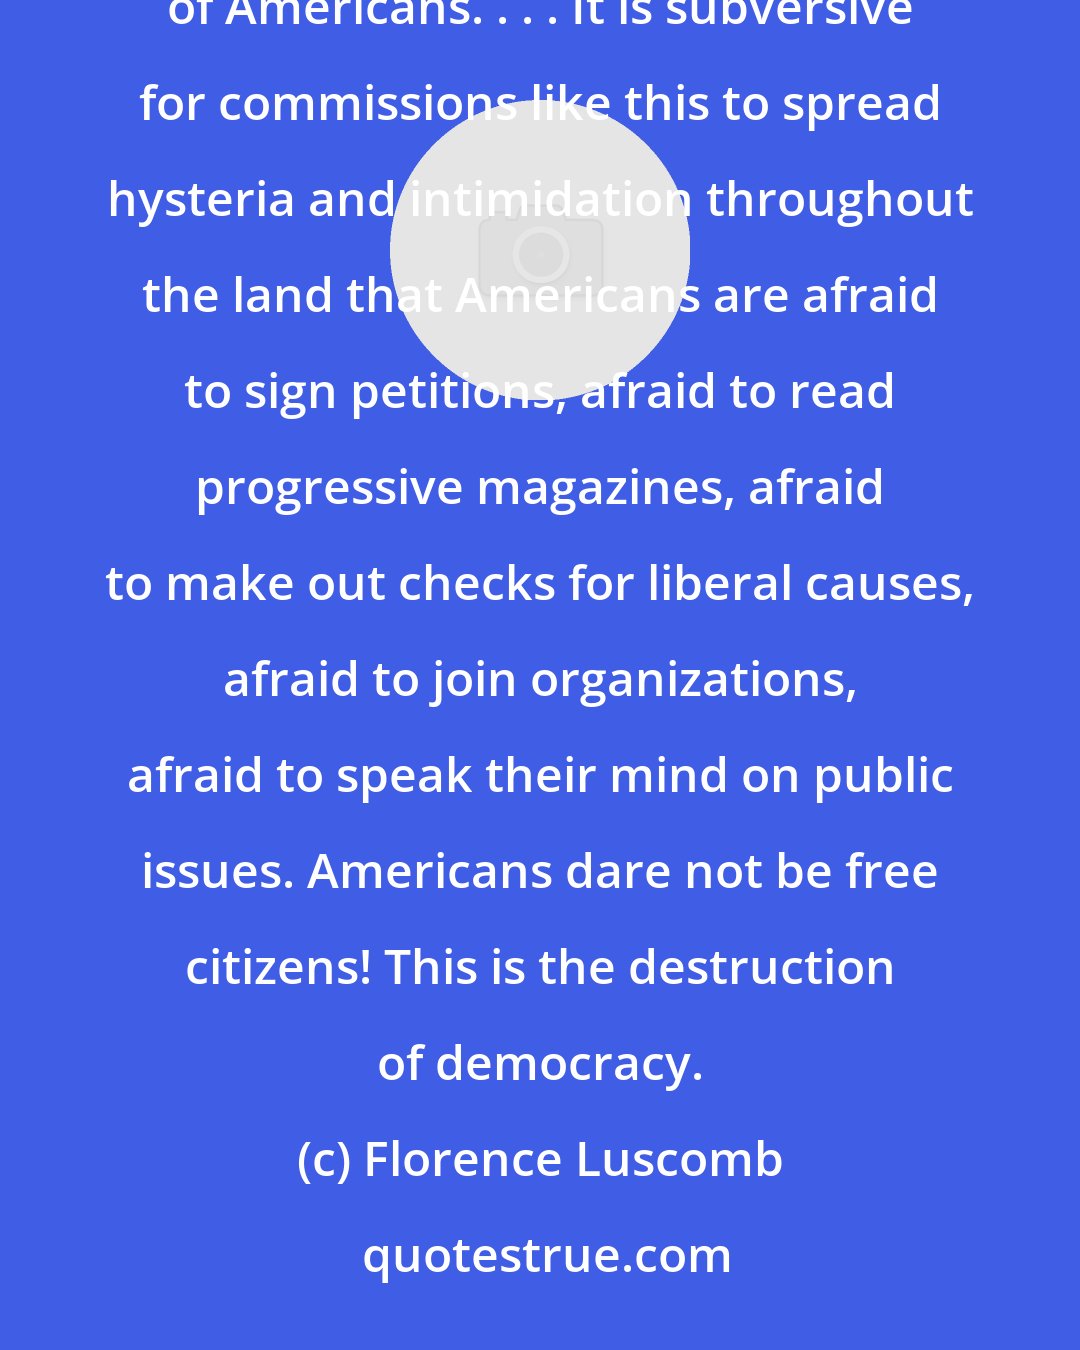 Florence Luscomb: It is subversive to set up inquisitions like this, state or national, into the thoughts and consciences of Americans. . . . It is subversive for commissions like this to spread hysteria and intimidation throughout the land that Americans are afraid to sign petitions, afraid to read progressive magazines, afraid to make out checks for liberal causes, afraid to join organizations, afraid to speak their mind on public issues. Americans dare not be free citizens! This is the destruction of democracy.